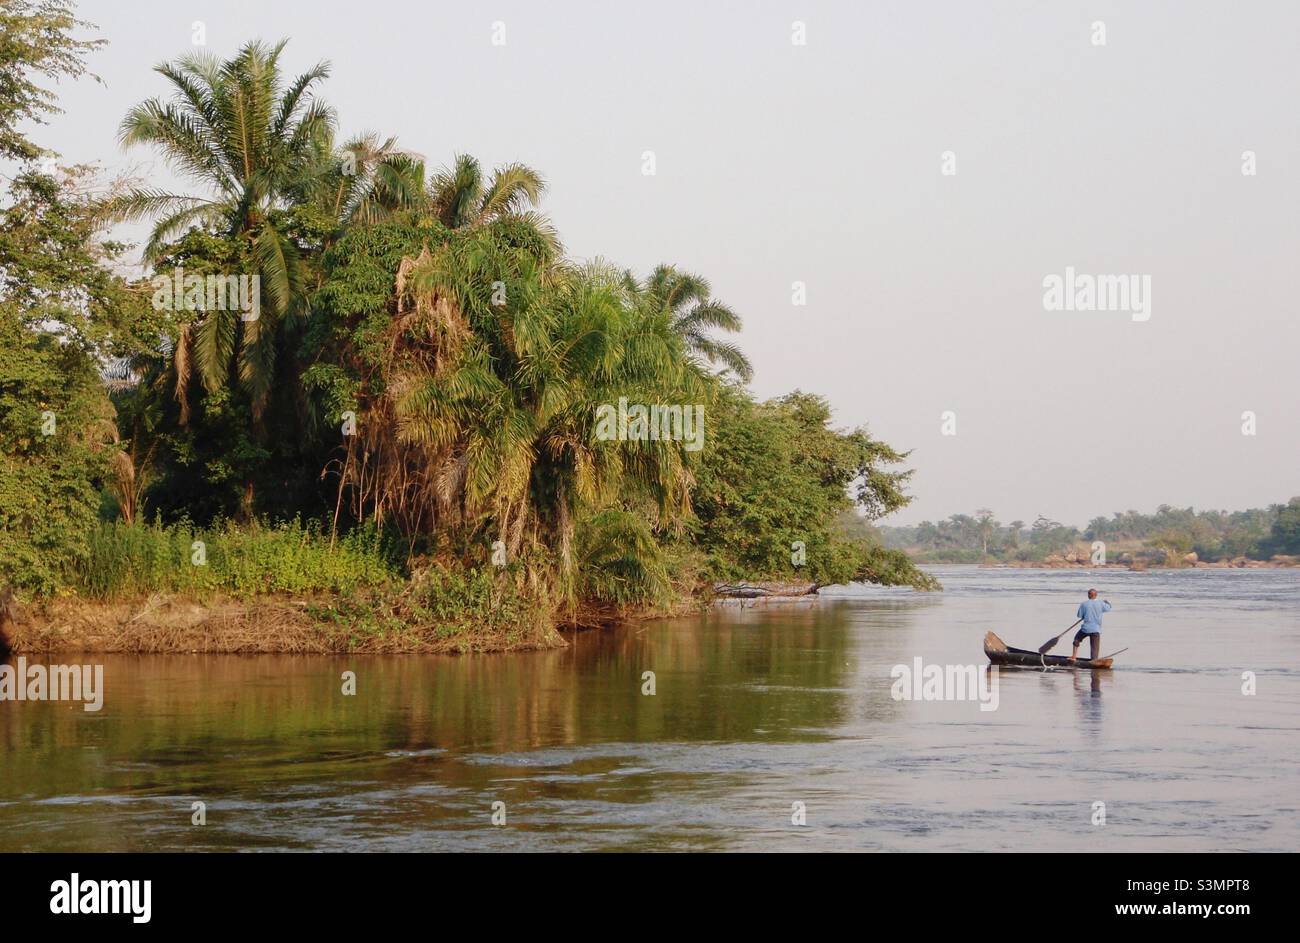 Man in a canoe on the Congo river Stock Photo